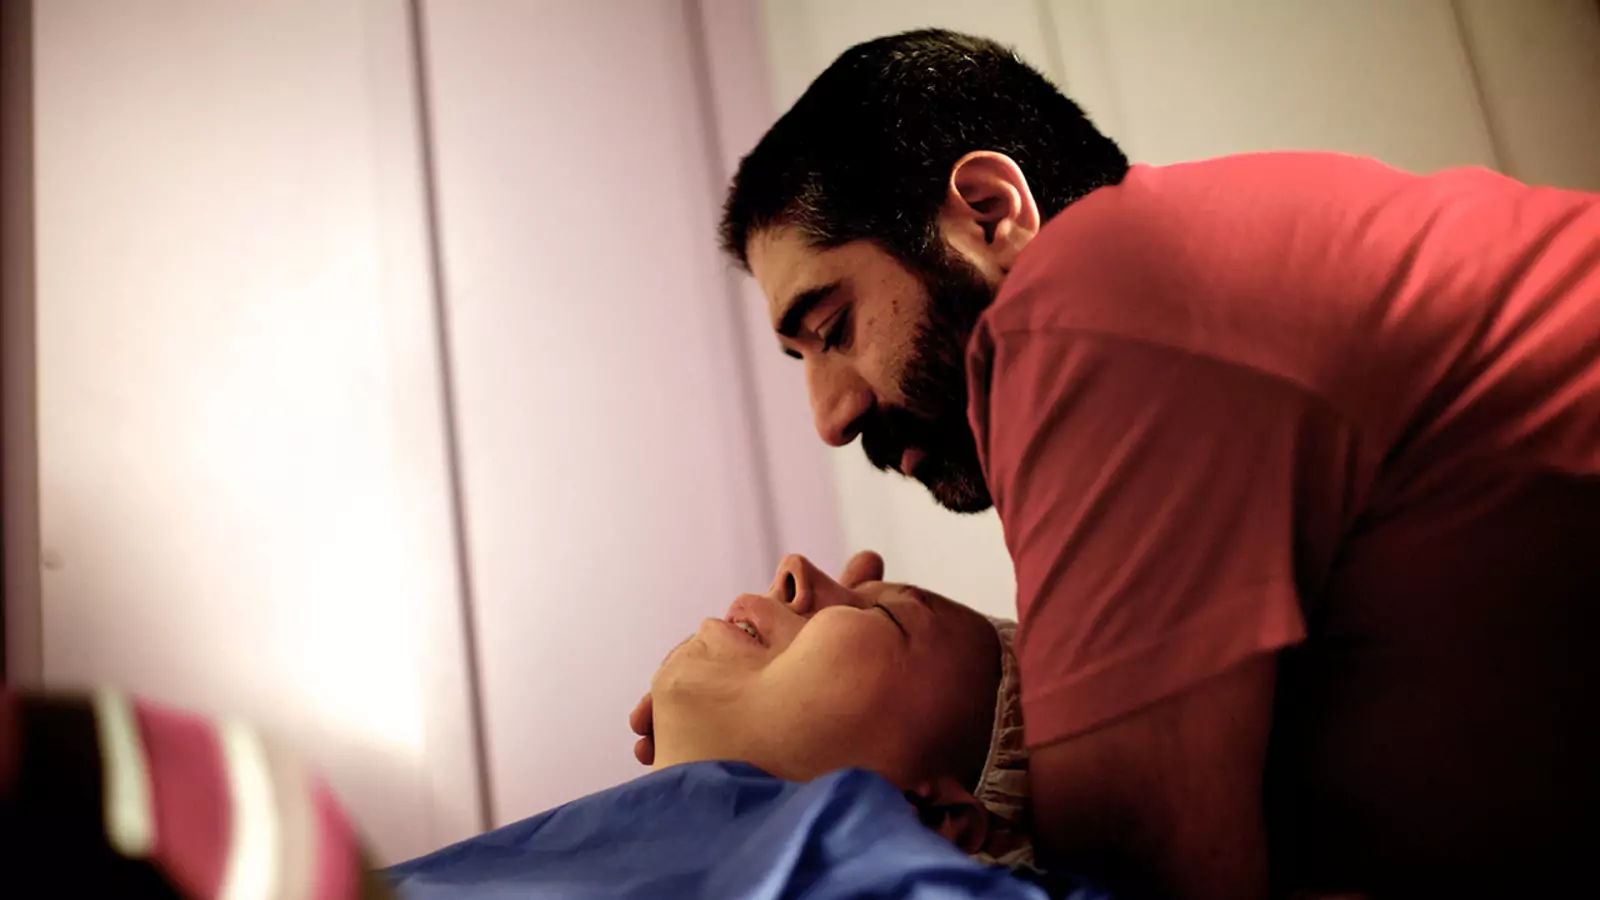 A man comforts his fiancée, a patient at a breast cancer clinic in Tehran, Iran. With little access to preventive and primary care, working-age people in poorer nations are more likely to develop and receive late diagnoses for cancers and other NCDs.